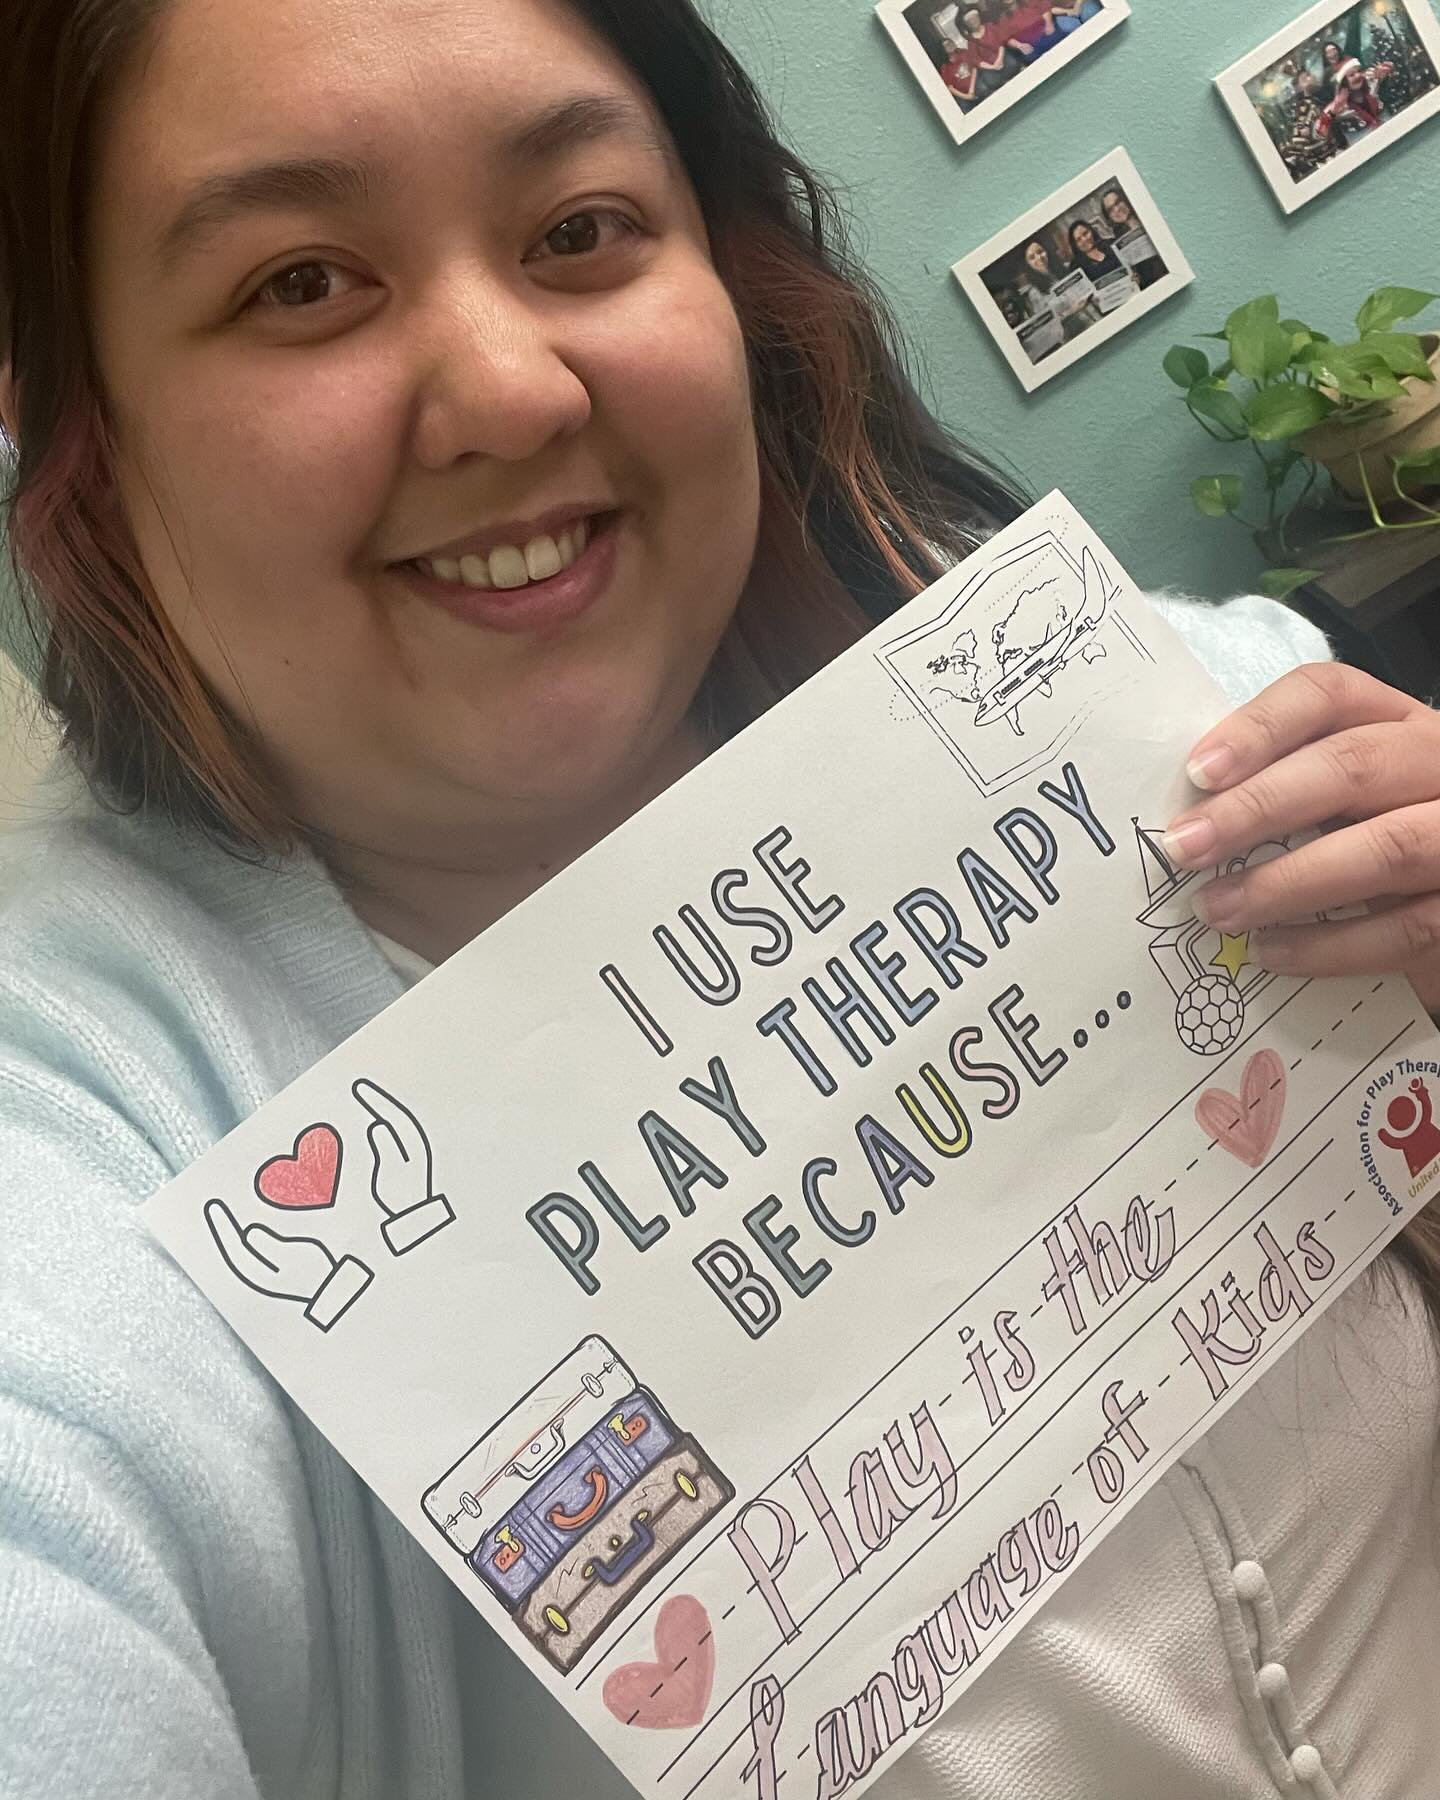 Danielle uses play therapy because it&rsquo;s the language of kids!
#playtherapyweek2024